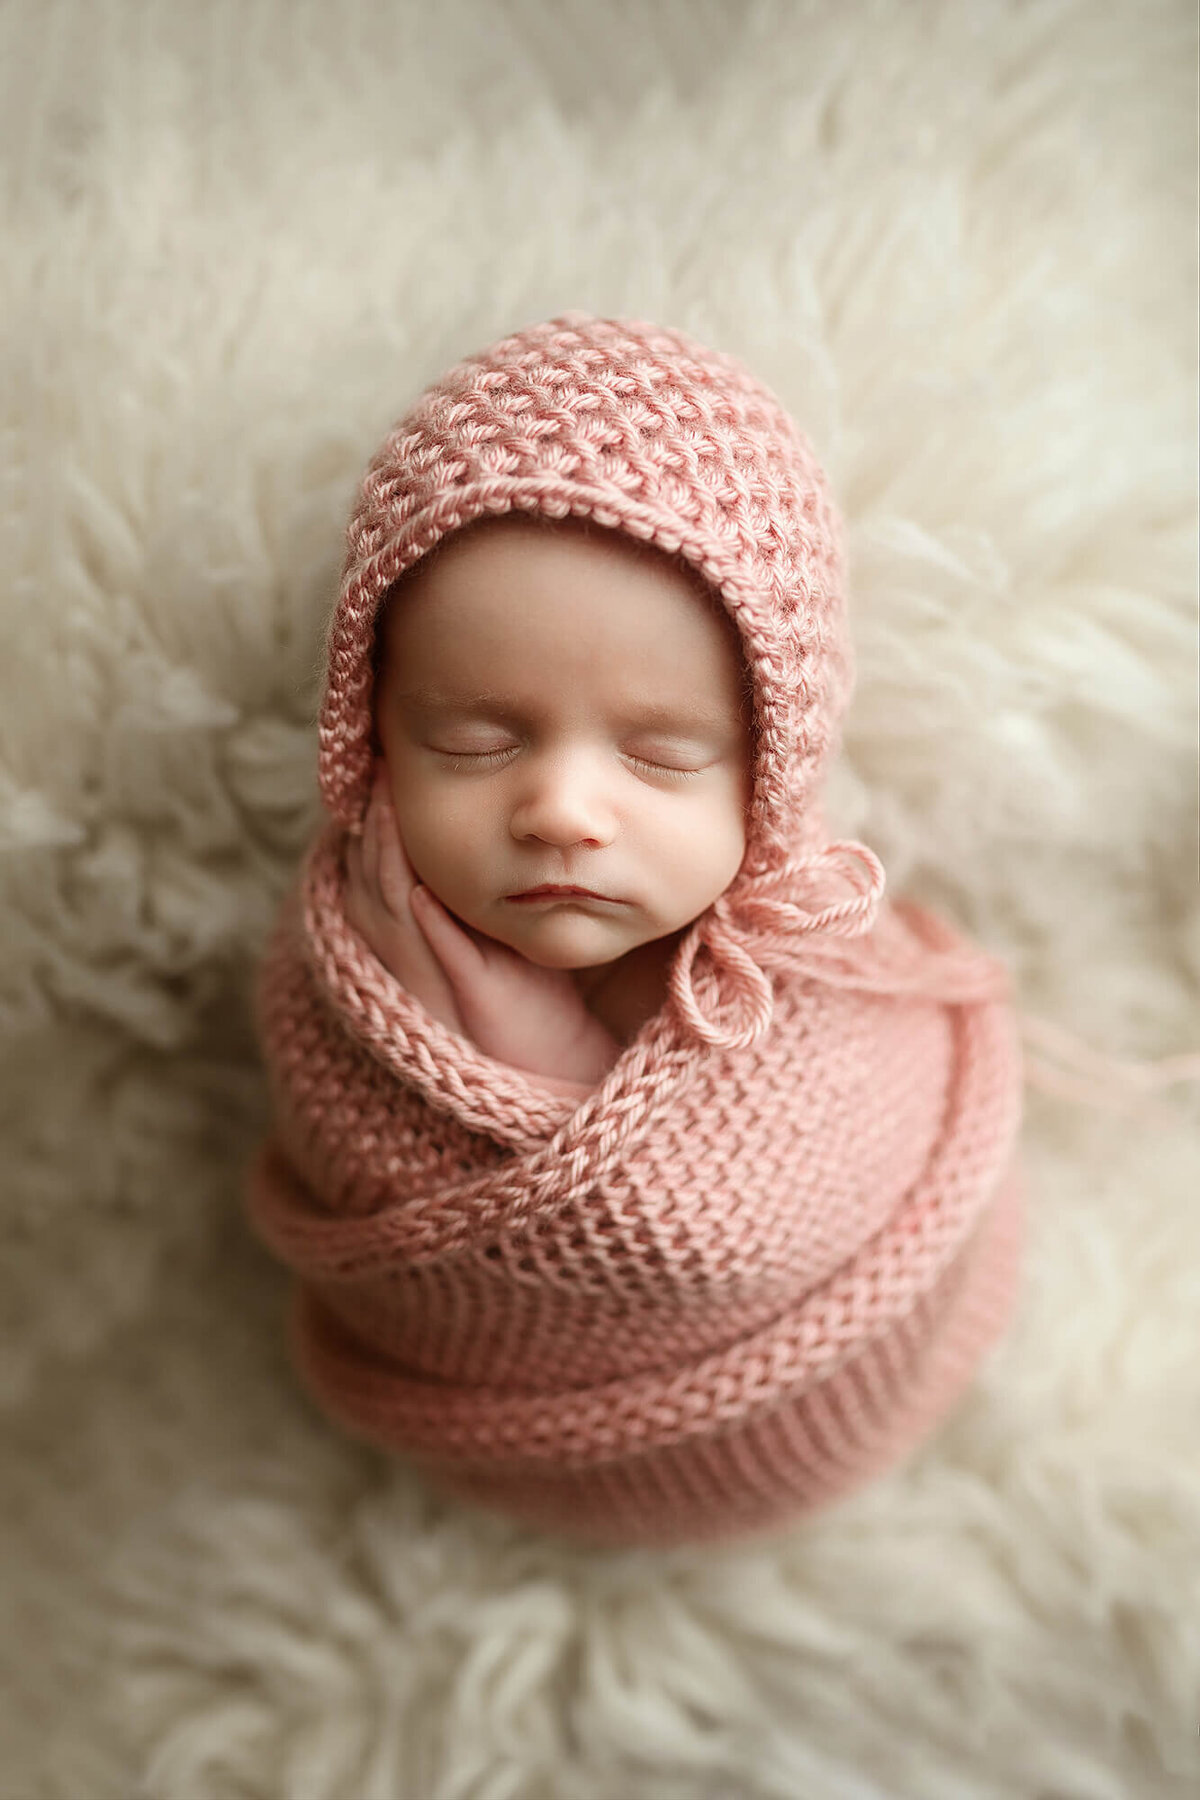 Baby girl wrapped in a pink knitted blanket with matching bonnet.